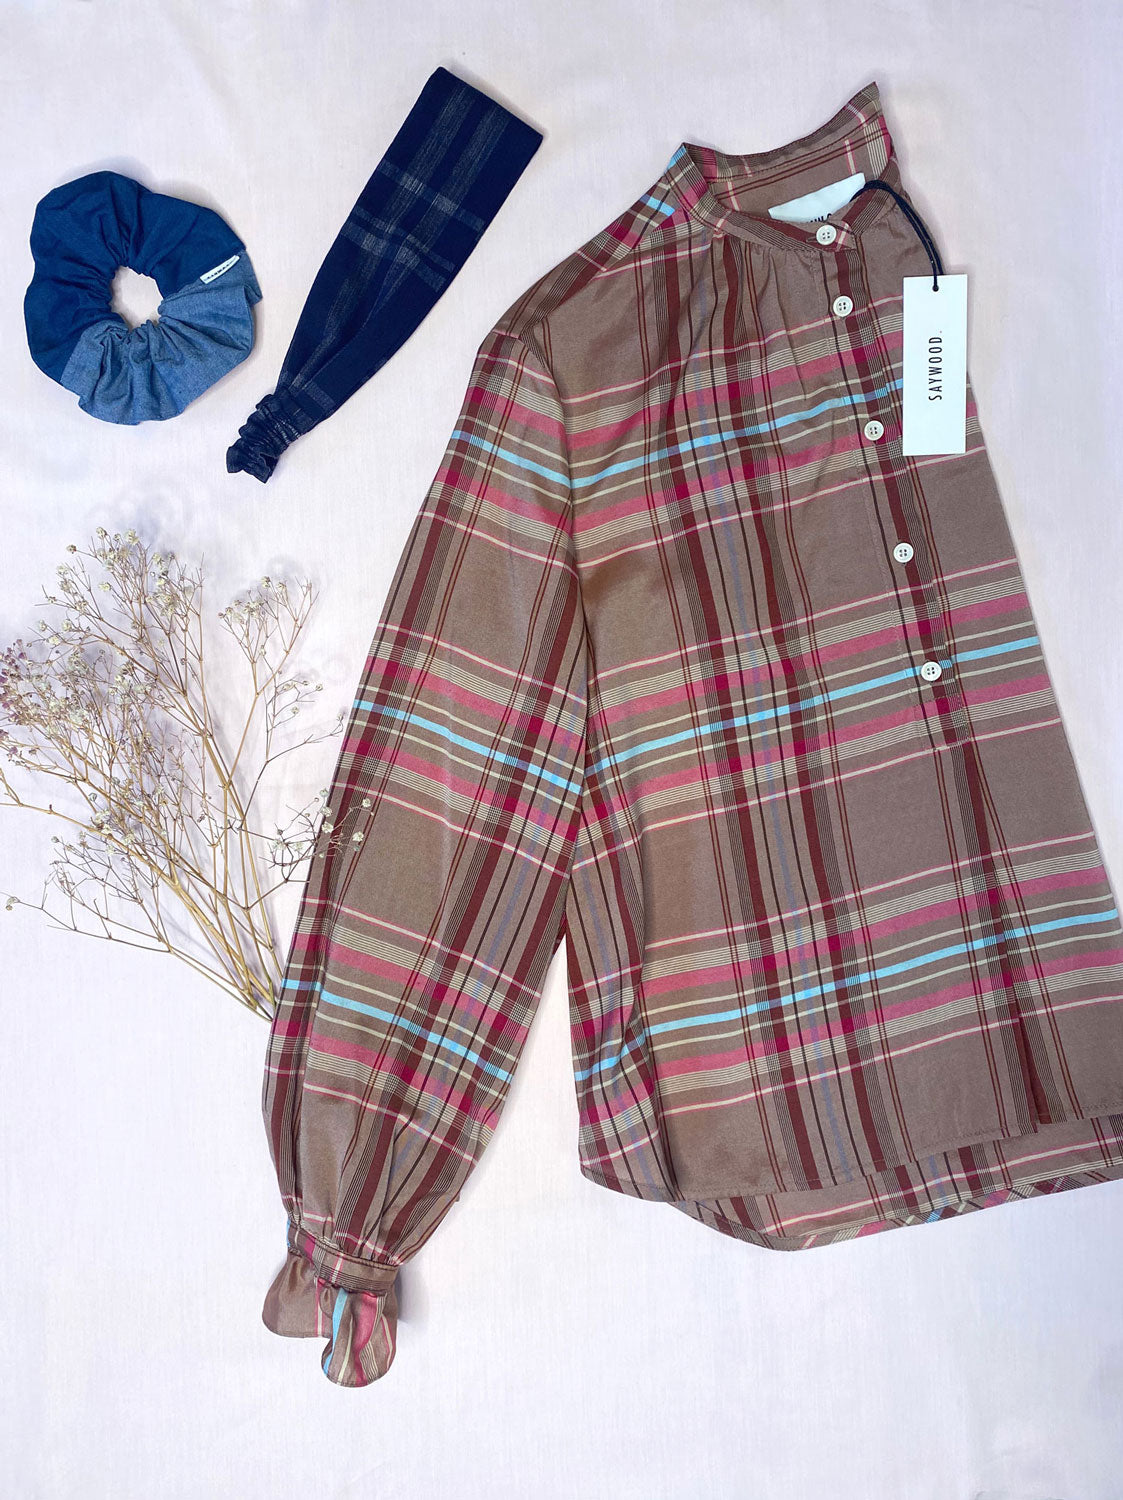 Pink check silky blouse with gathered cuffs lays next to a navy check headband and patchwork denim scrunchie.